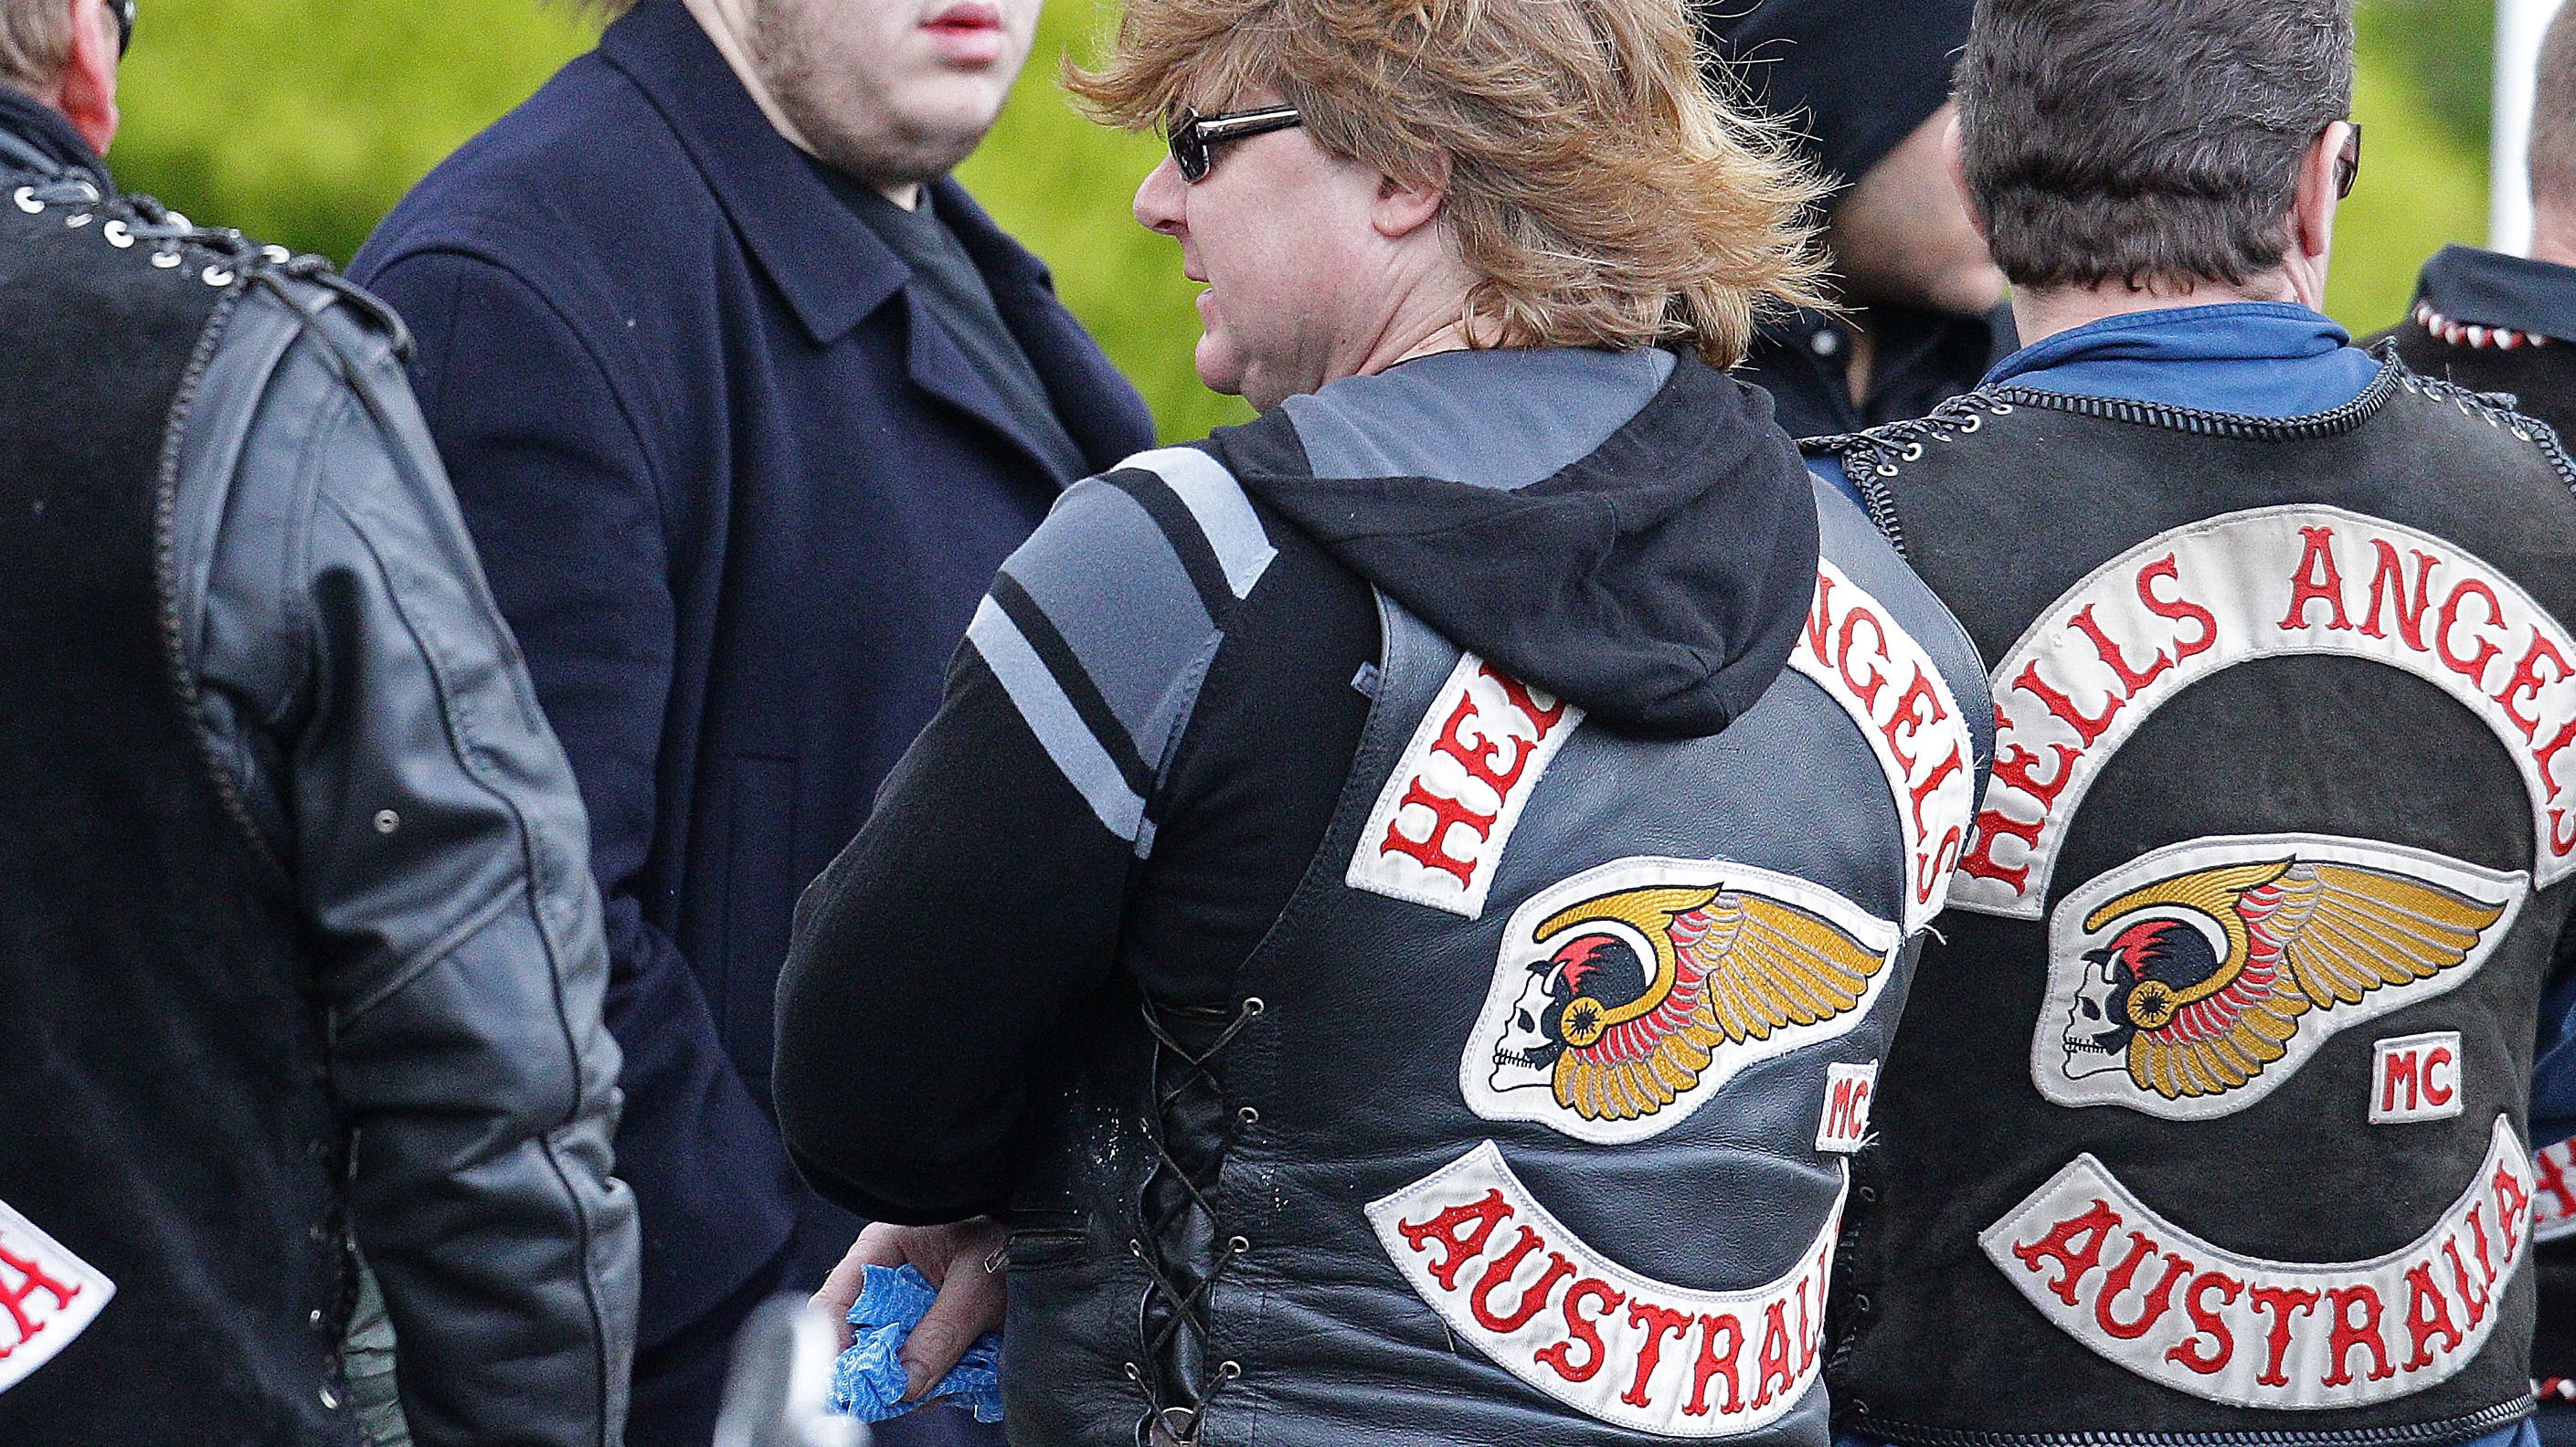 Australian Hells Angels show their colors at a Melbourne underworld funeral in 2010. 